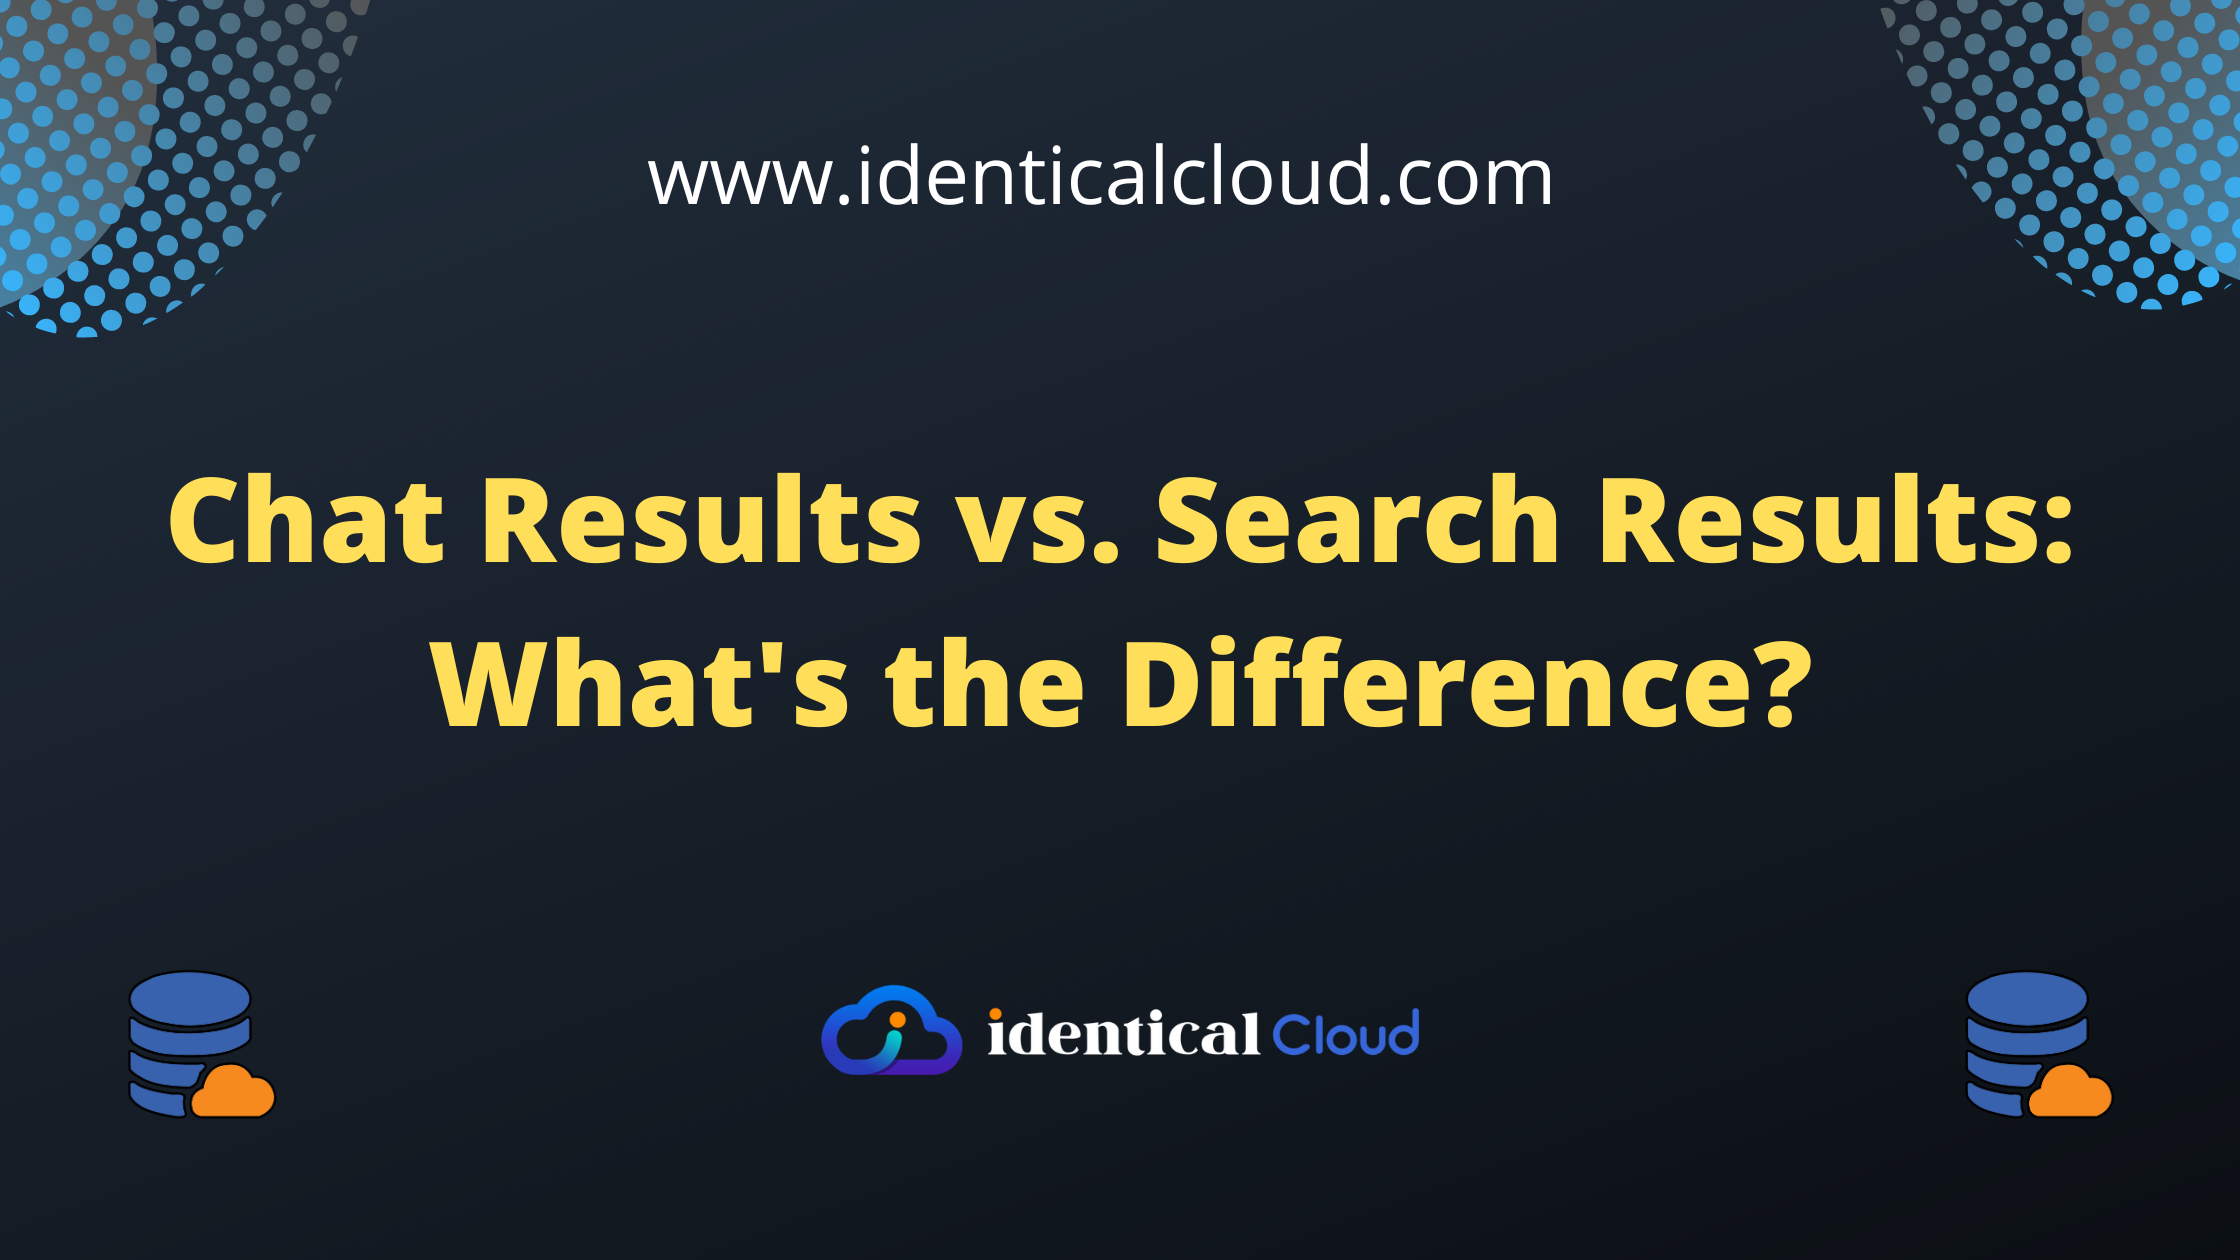 Chat Results vs. Search Results: What's the Difference? - identicalcloud.com